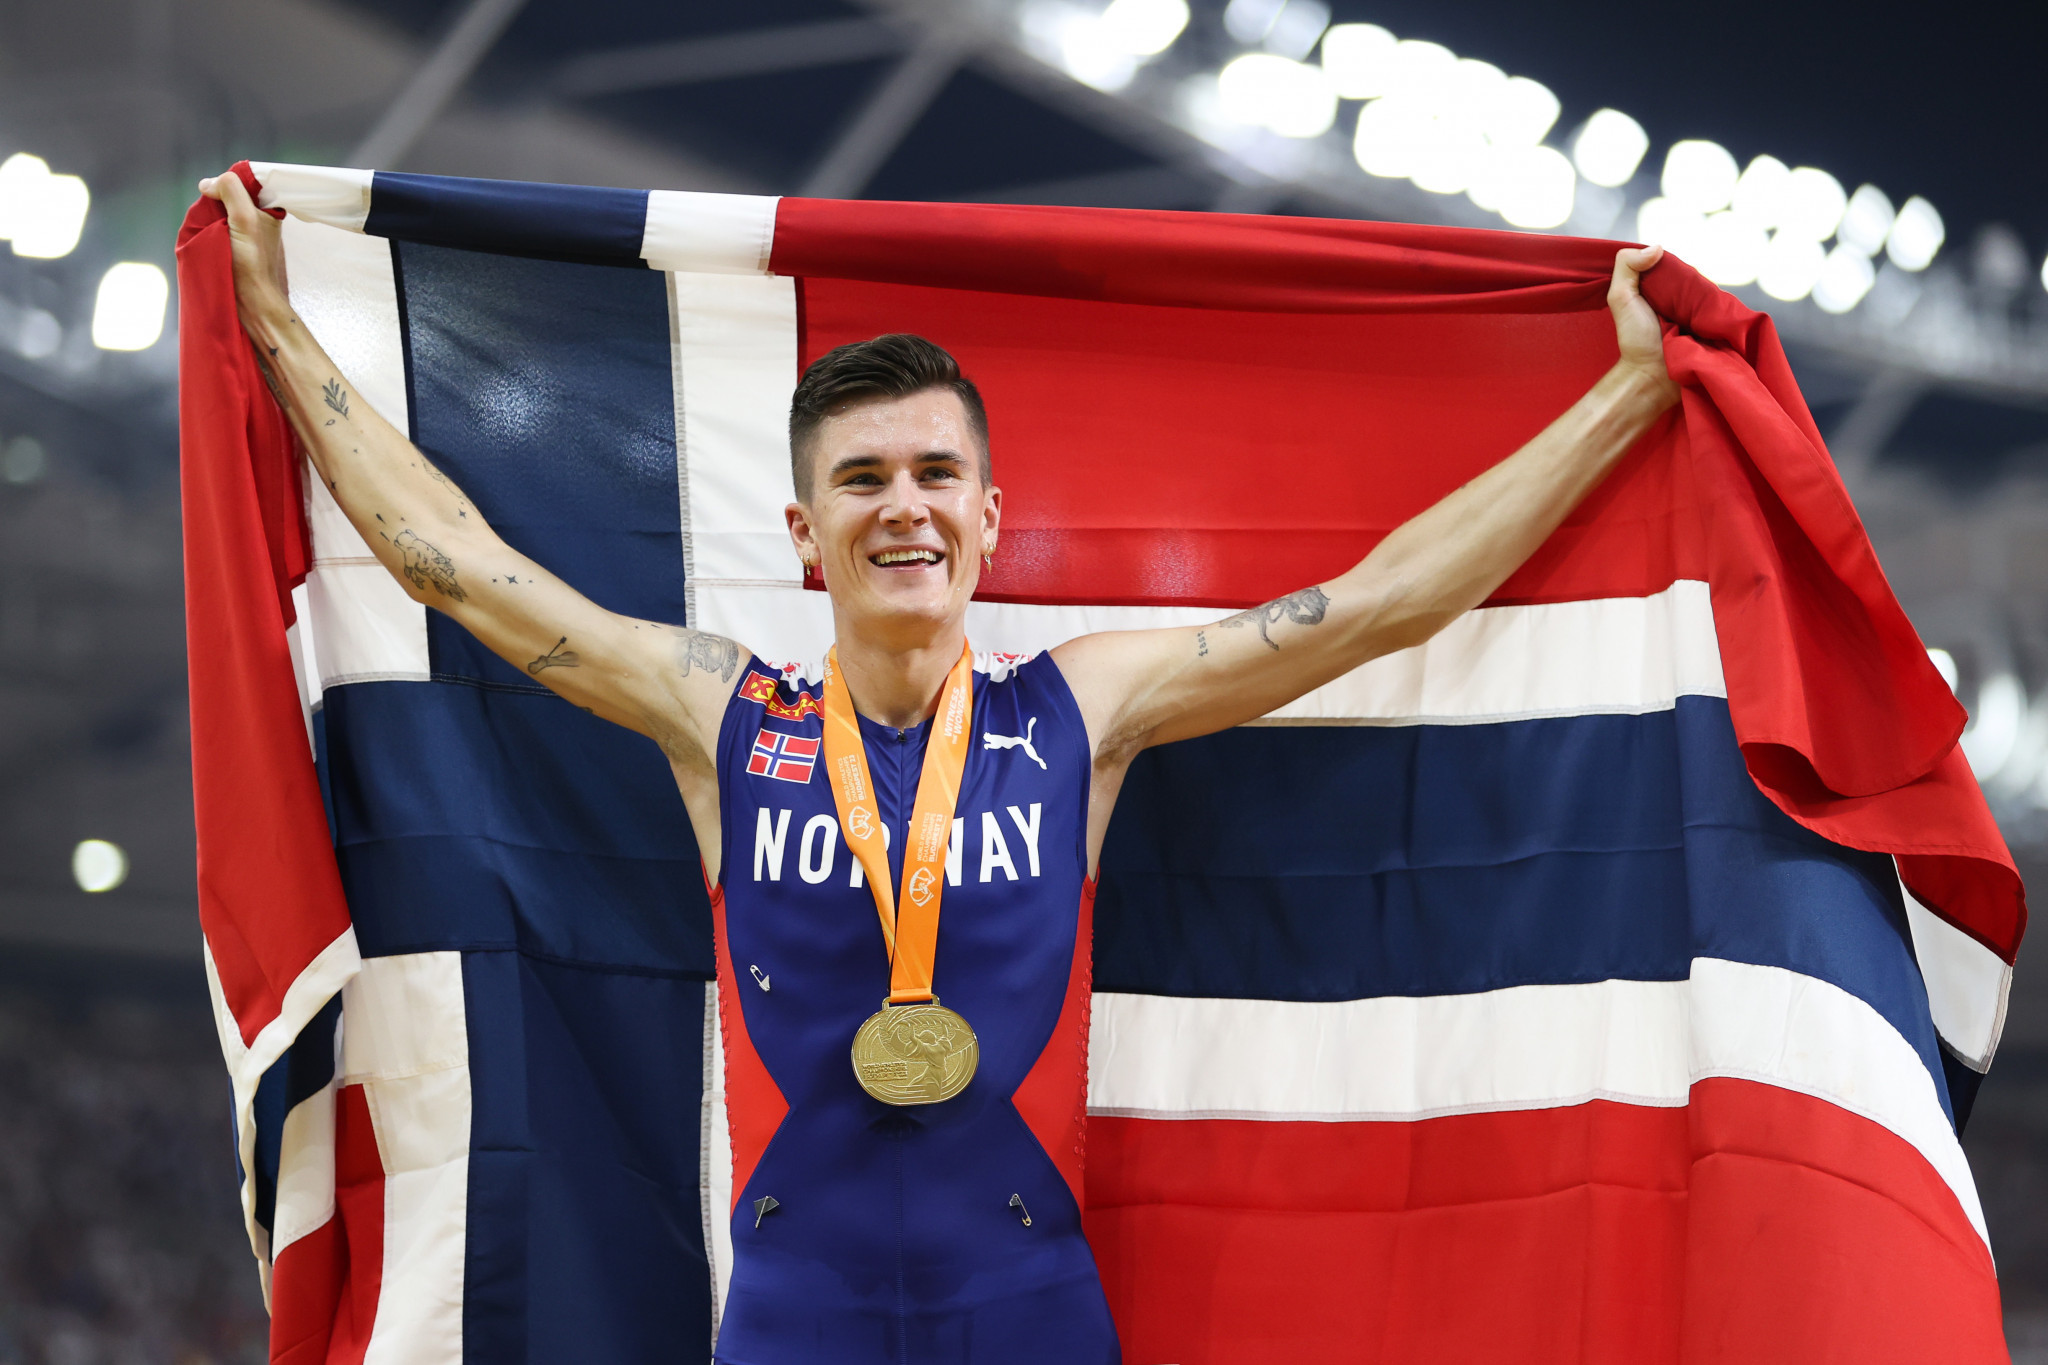 Olympic champion Ingebrigtsen's father has been charged with domestic violence. GETTY IMAGES